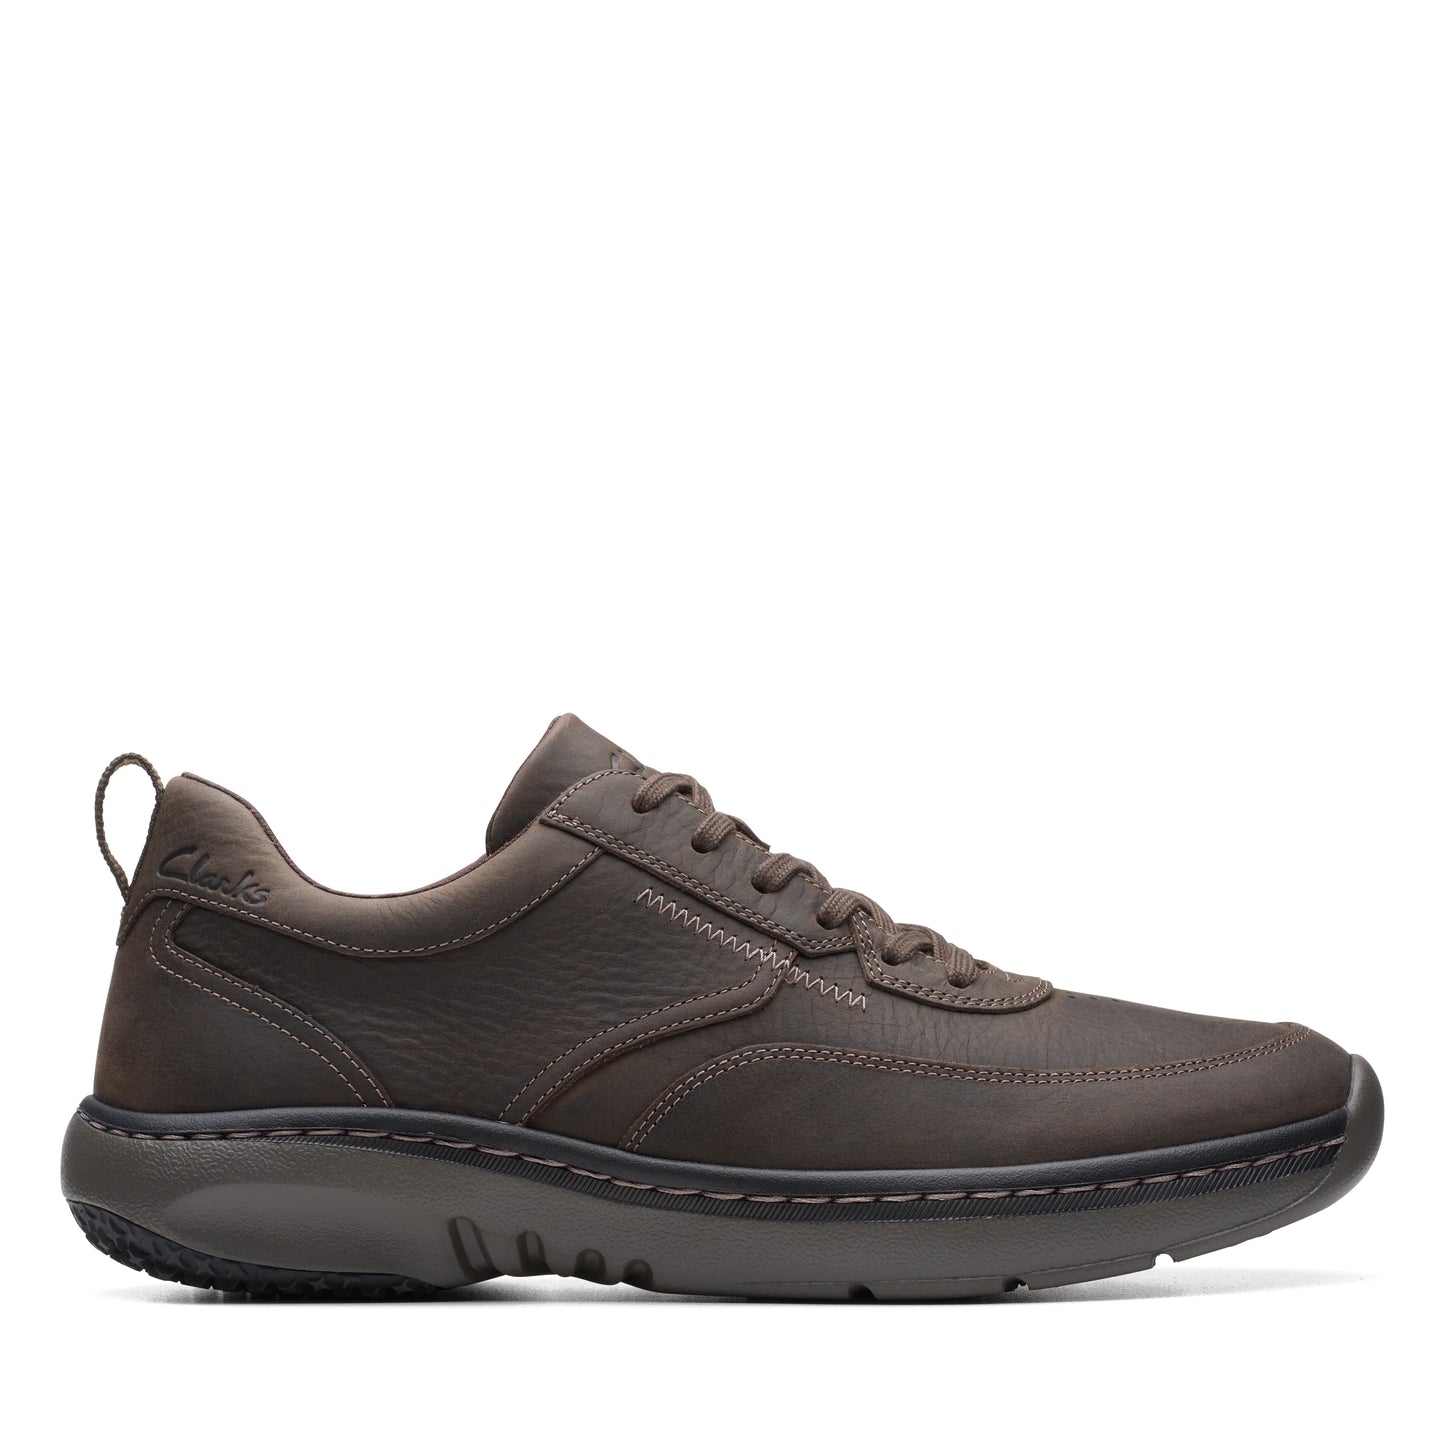 CLARKS | ZAPATOS DERBY HOMBRE | CLARKS PRO LACE DARK BROWN TUMBLED | MARRÓN